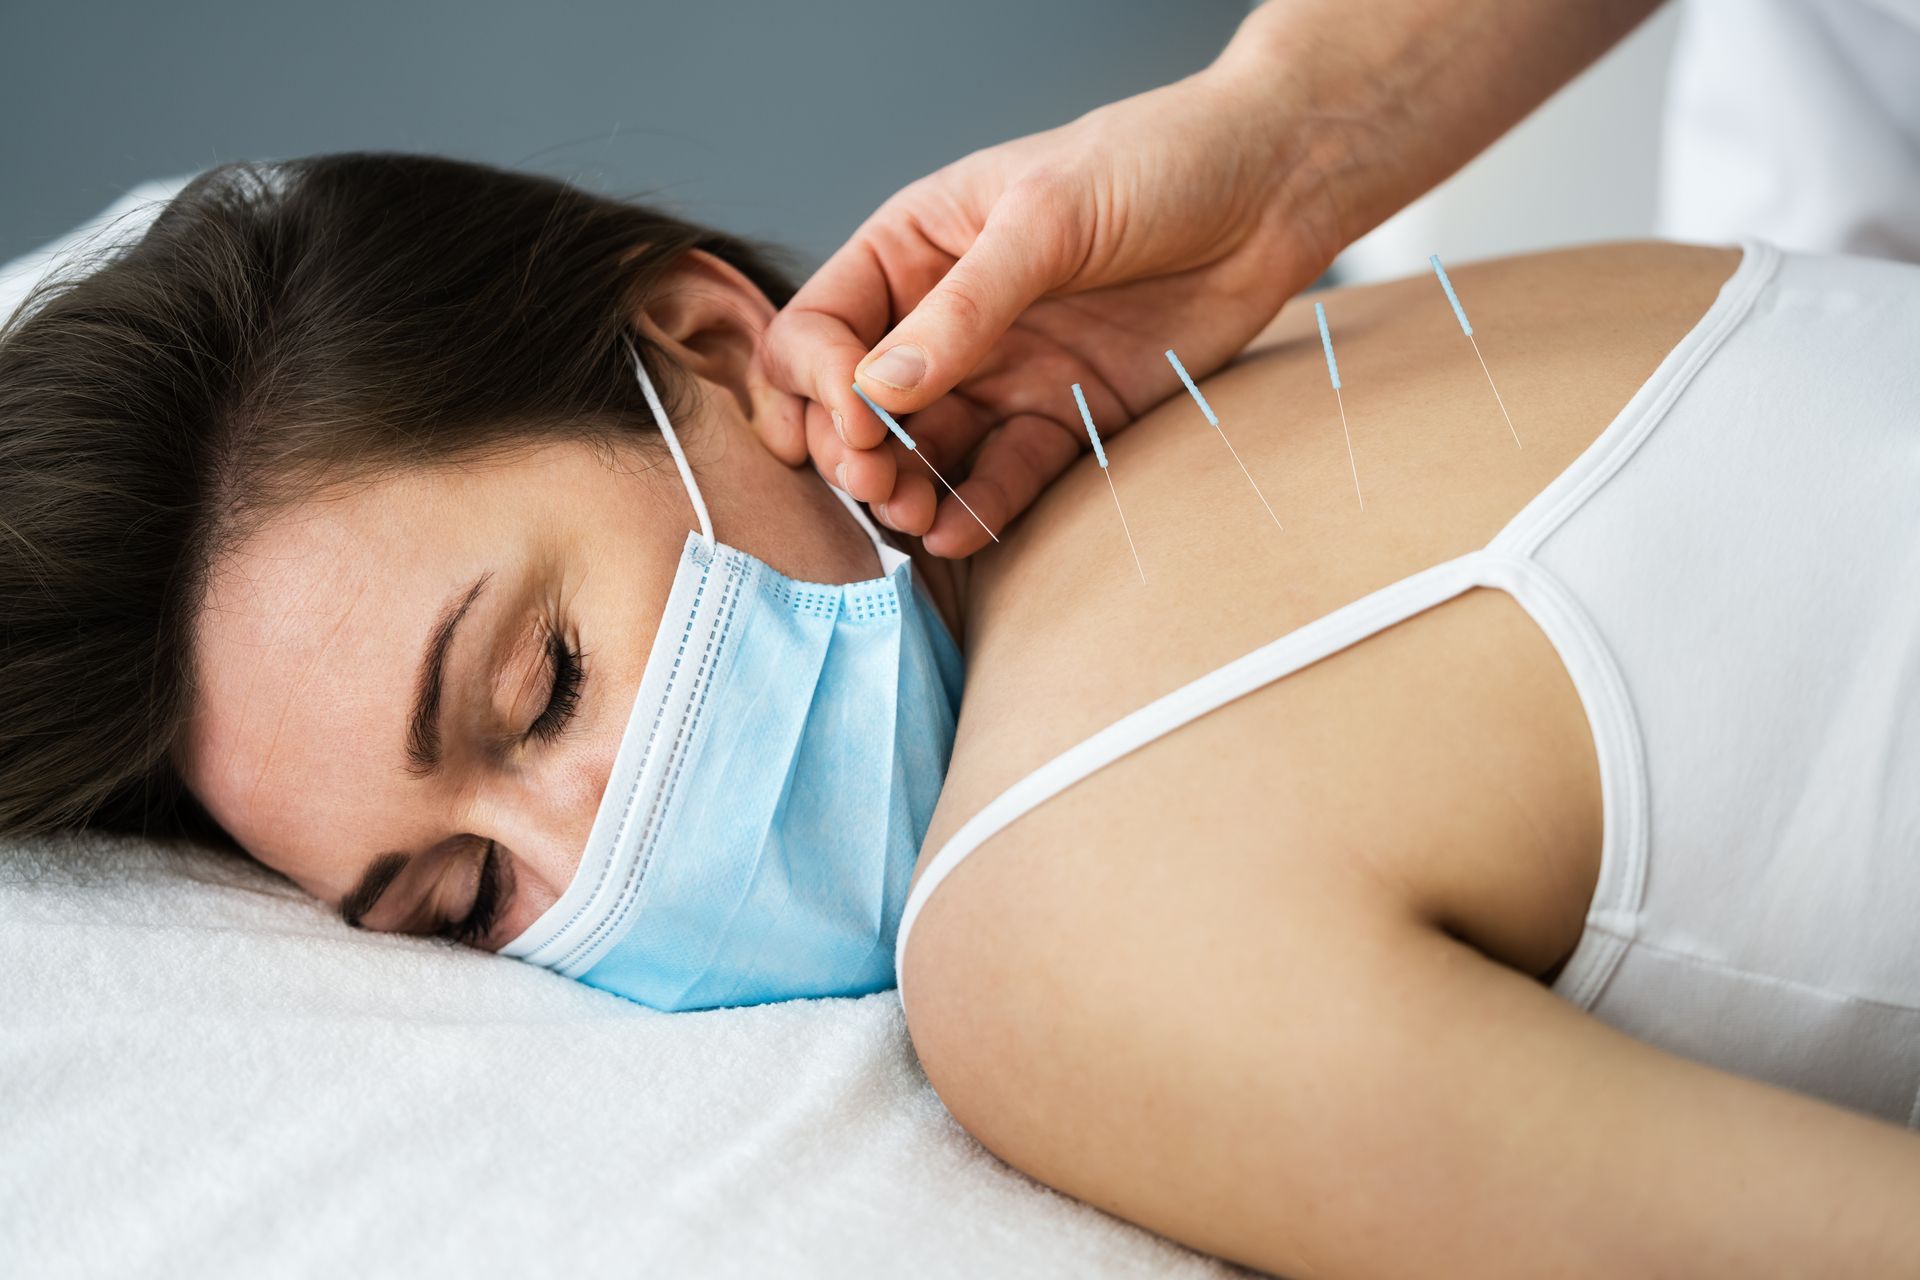 a woman wearing a mask is getting acupuncture on her back .